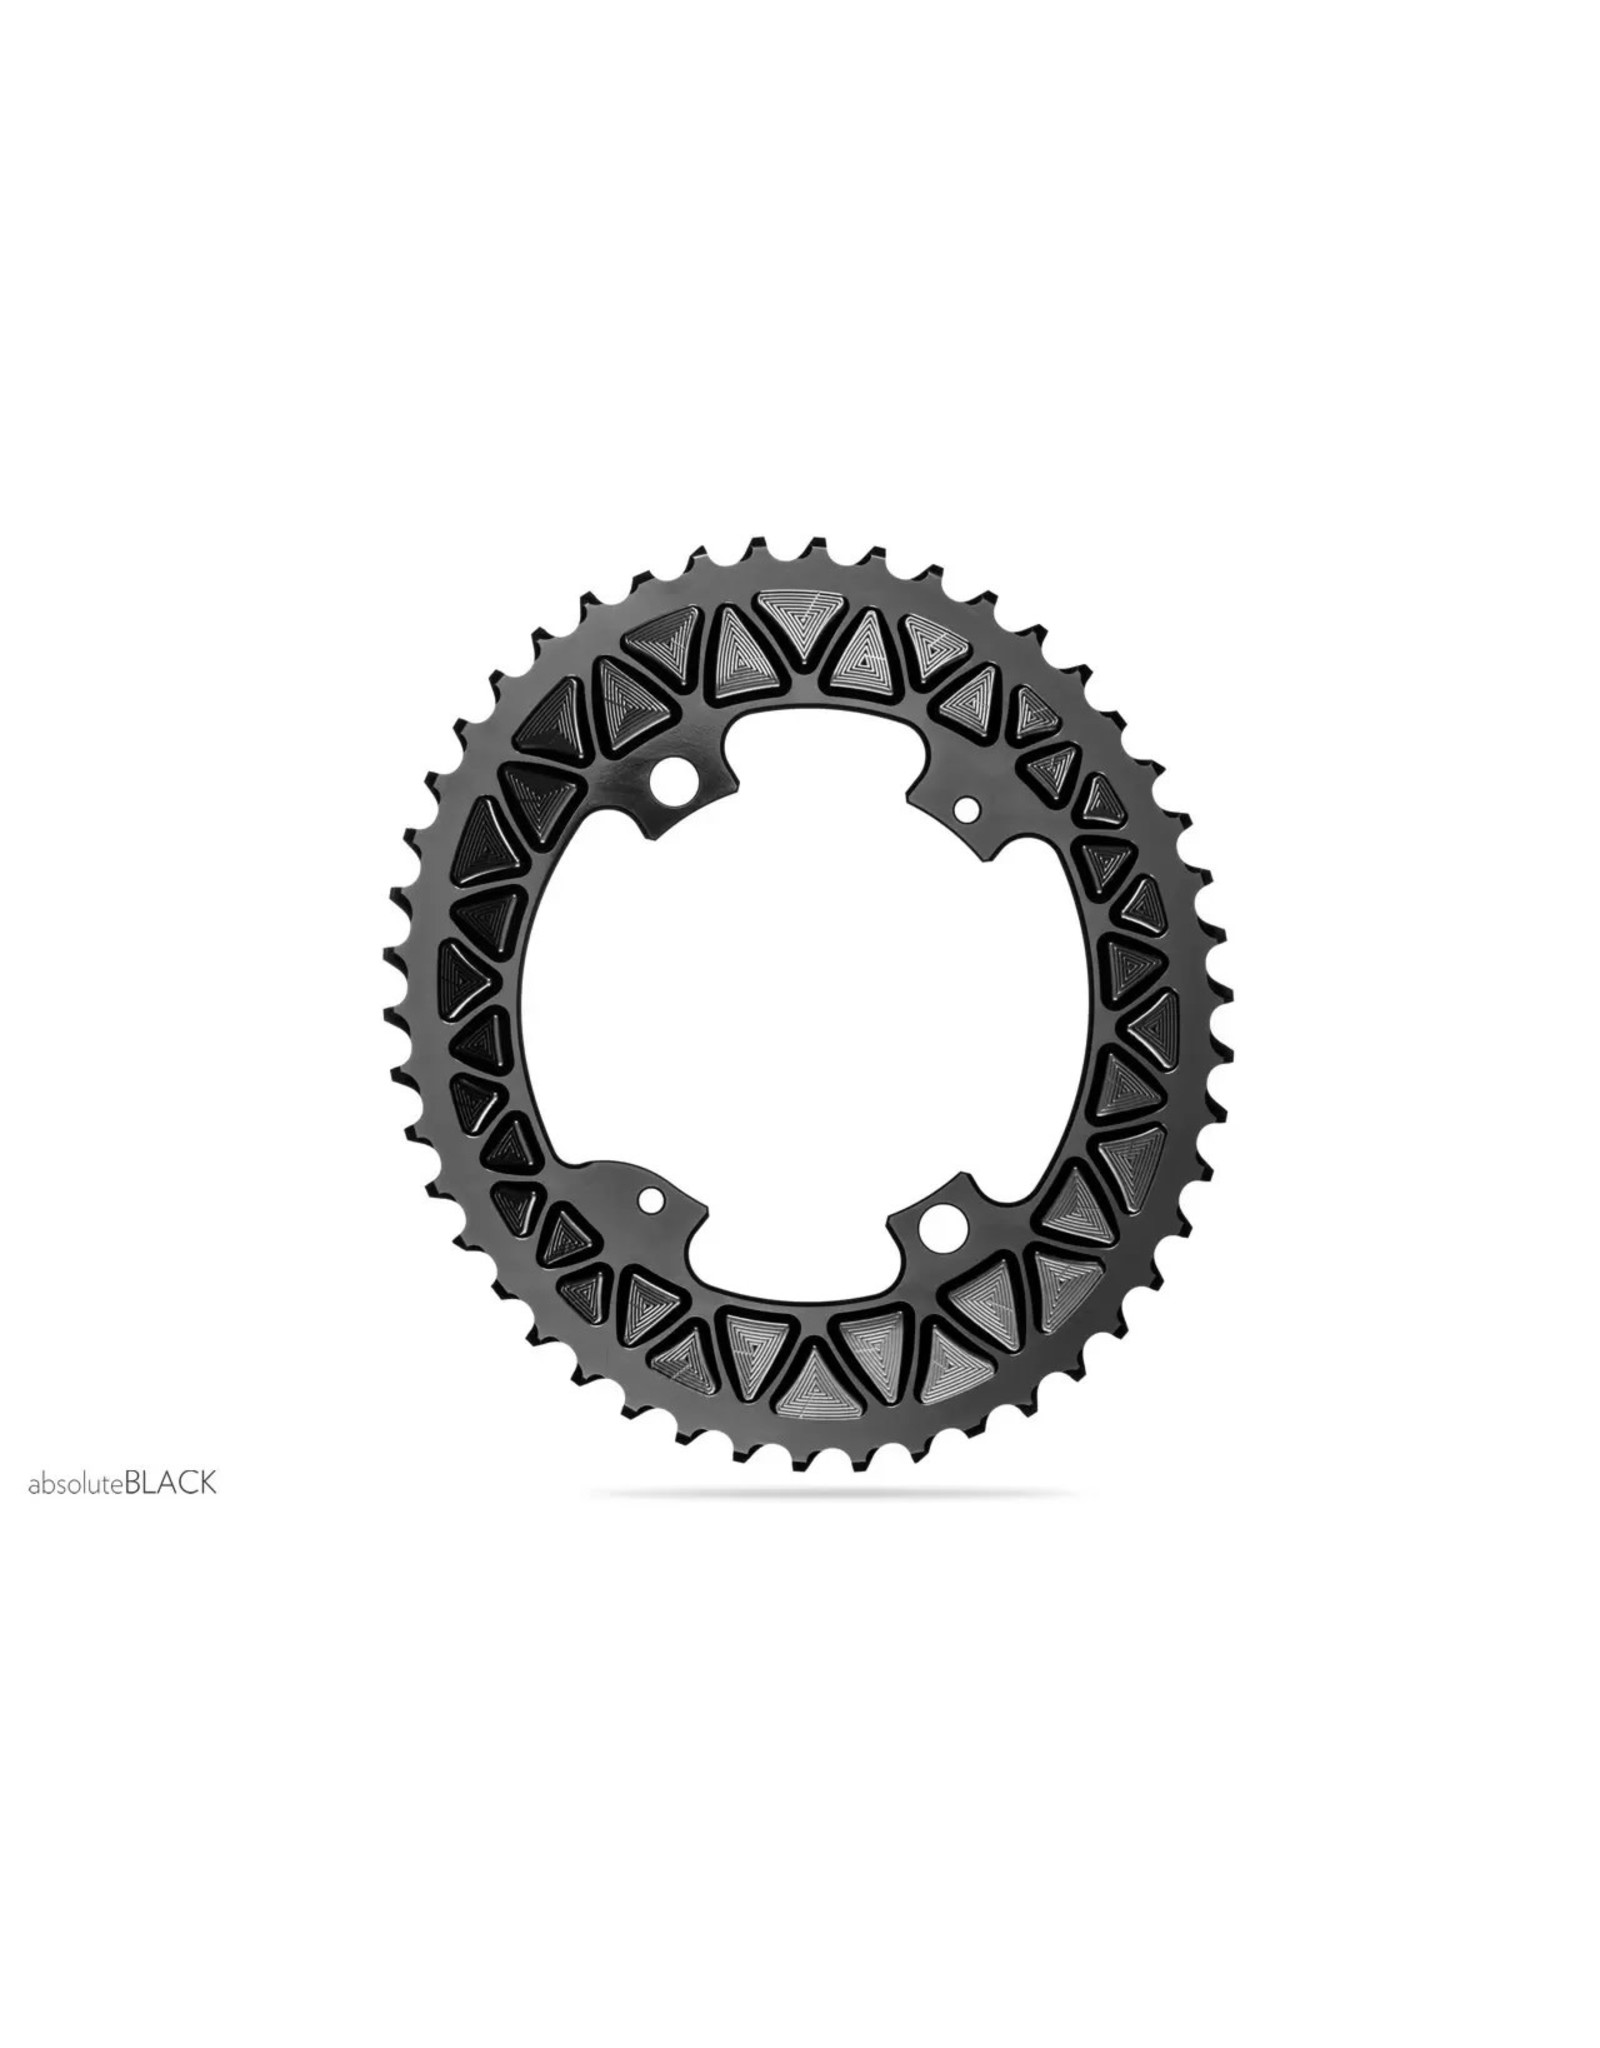 Absolute Black ABSOLUTE BLACK, Gravel Sub-compact Oval, 110/4, 2x Chainring, Black,  46T